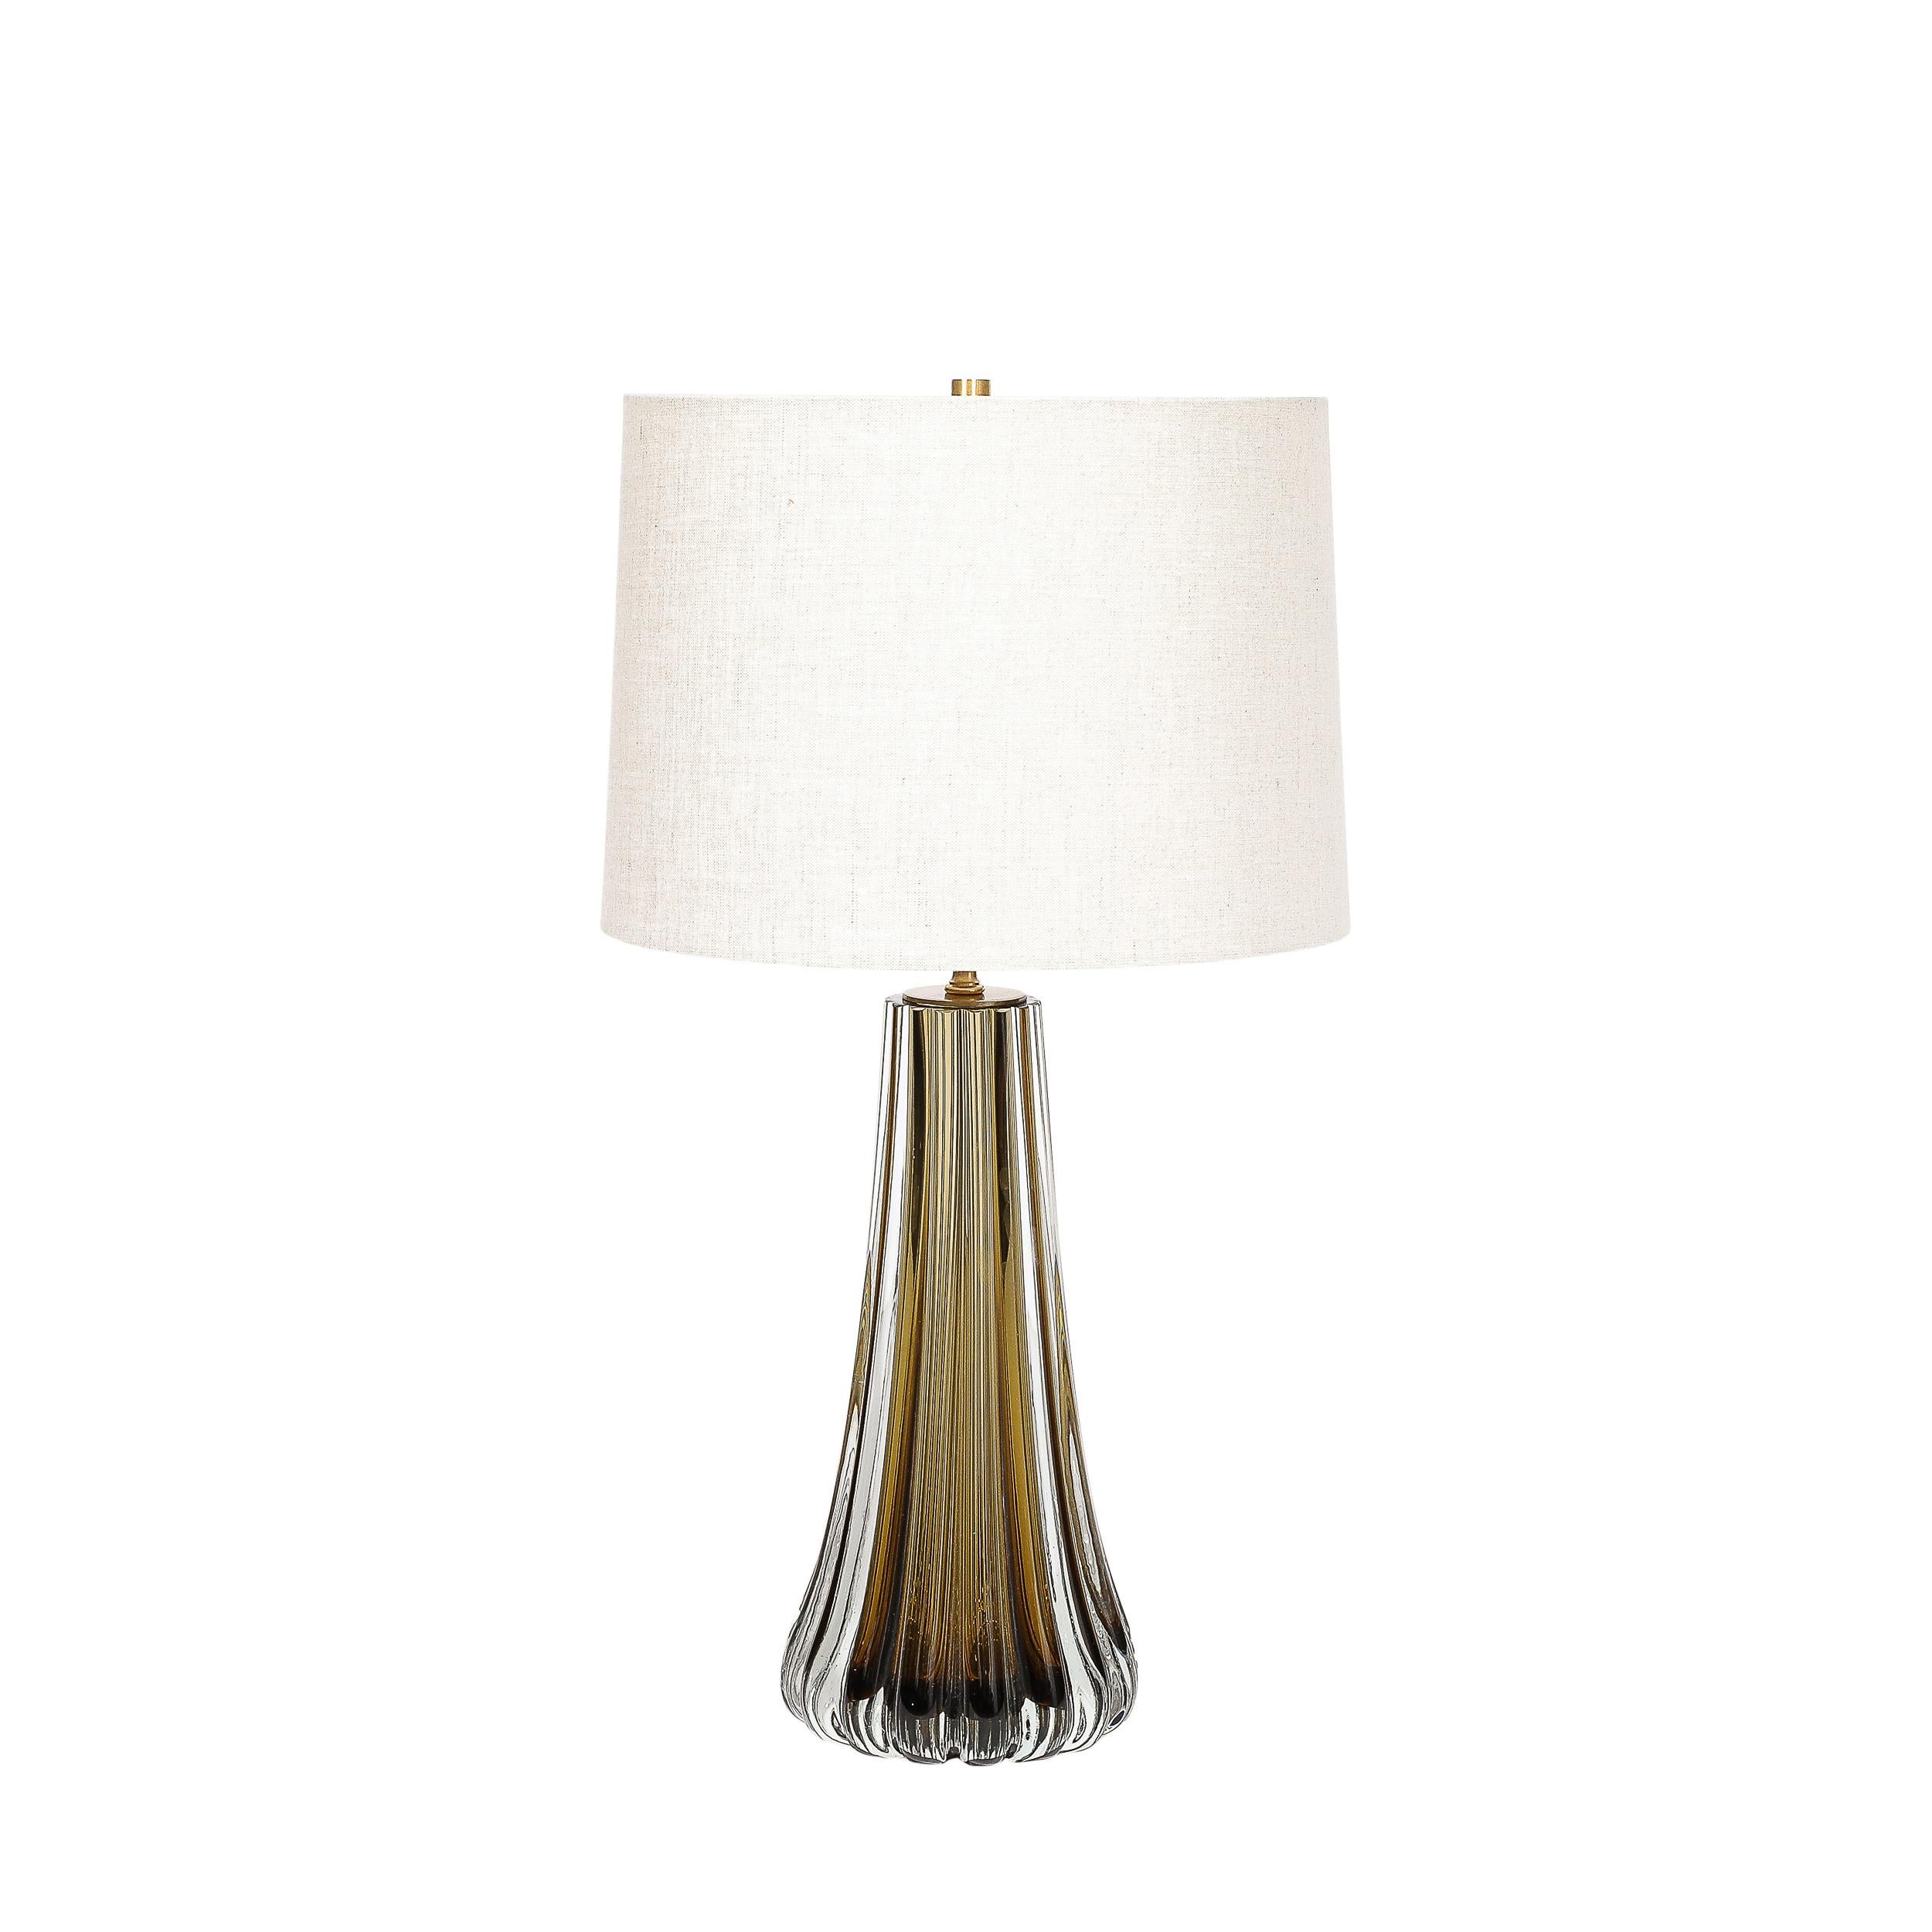 This exquisitely elegant Pair of Modernist Hand-Blown Murano Glass Table Lamps in Smoked Topaz W/ Stylized Fluted Detailing originate from Italy during the 21st Century. The lamps feature bodies formed in Hand-Blown Murano glass in a beautiful